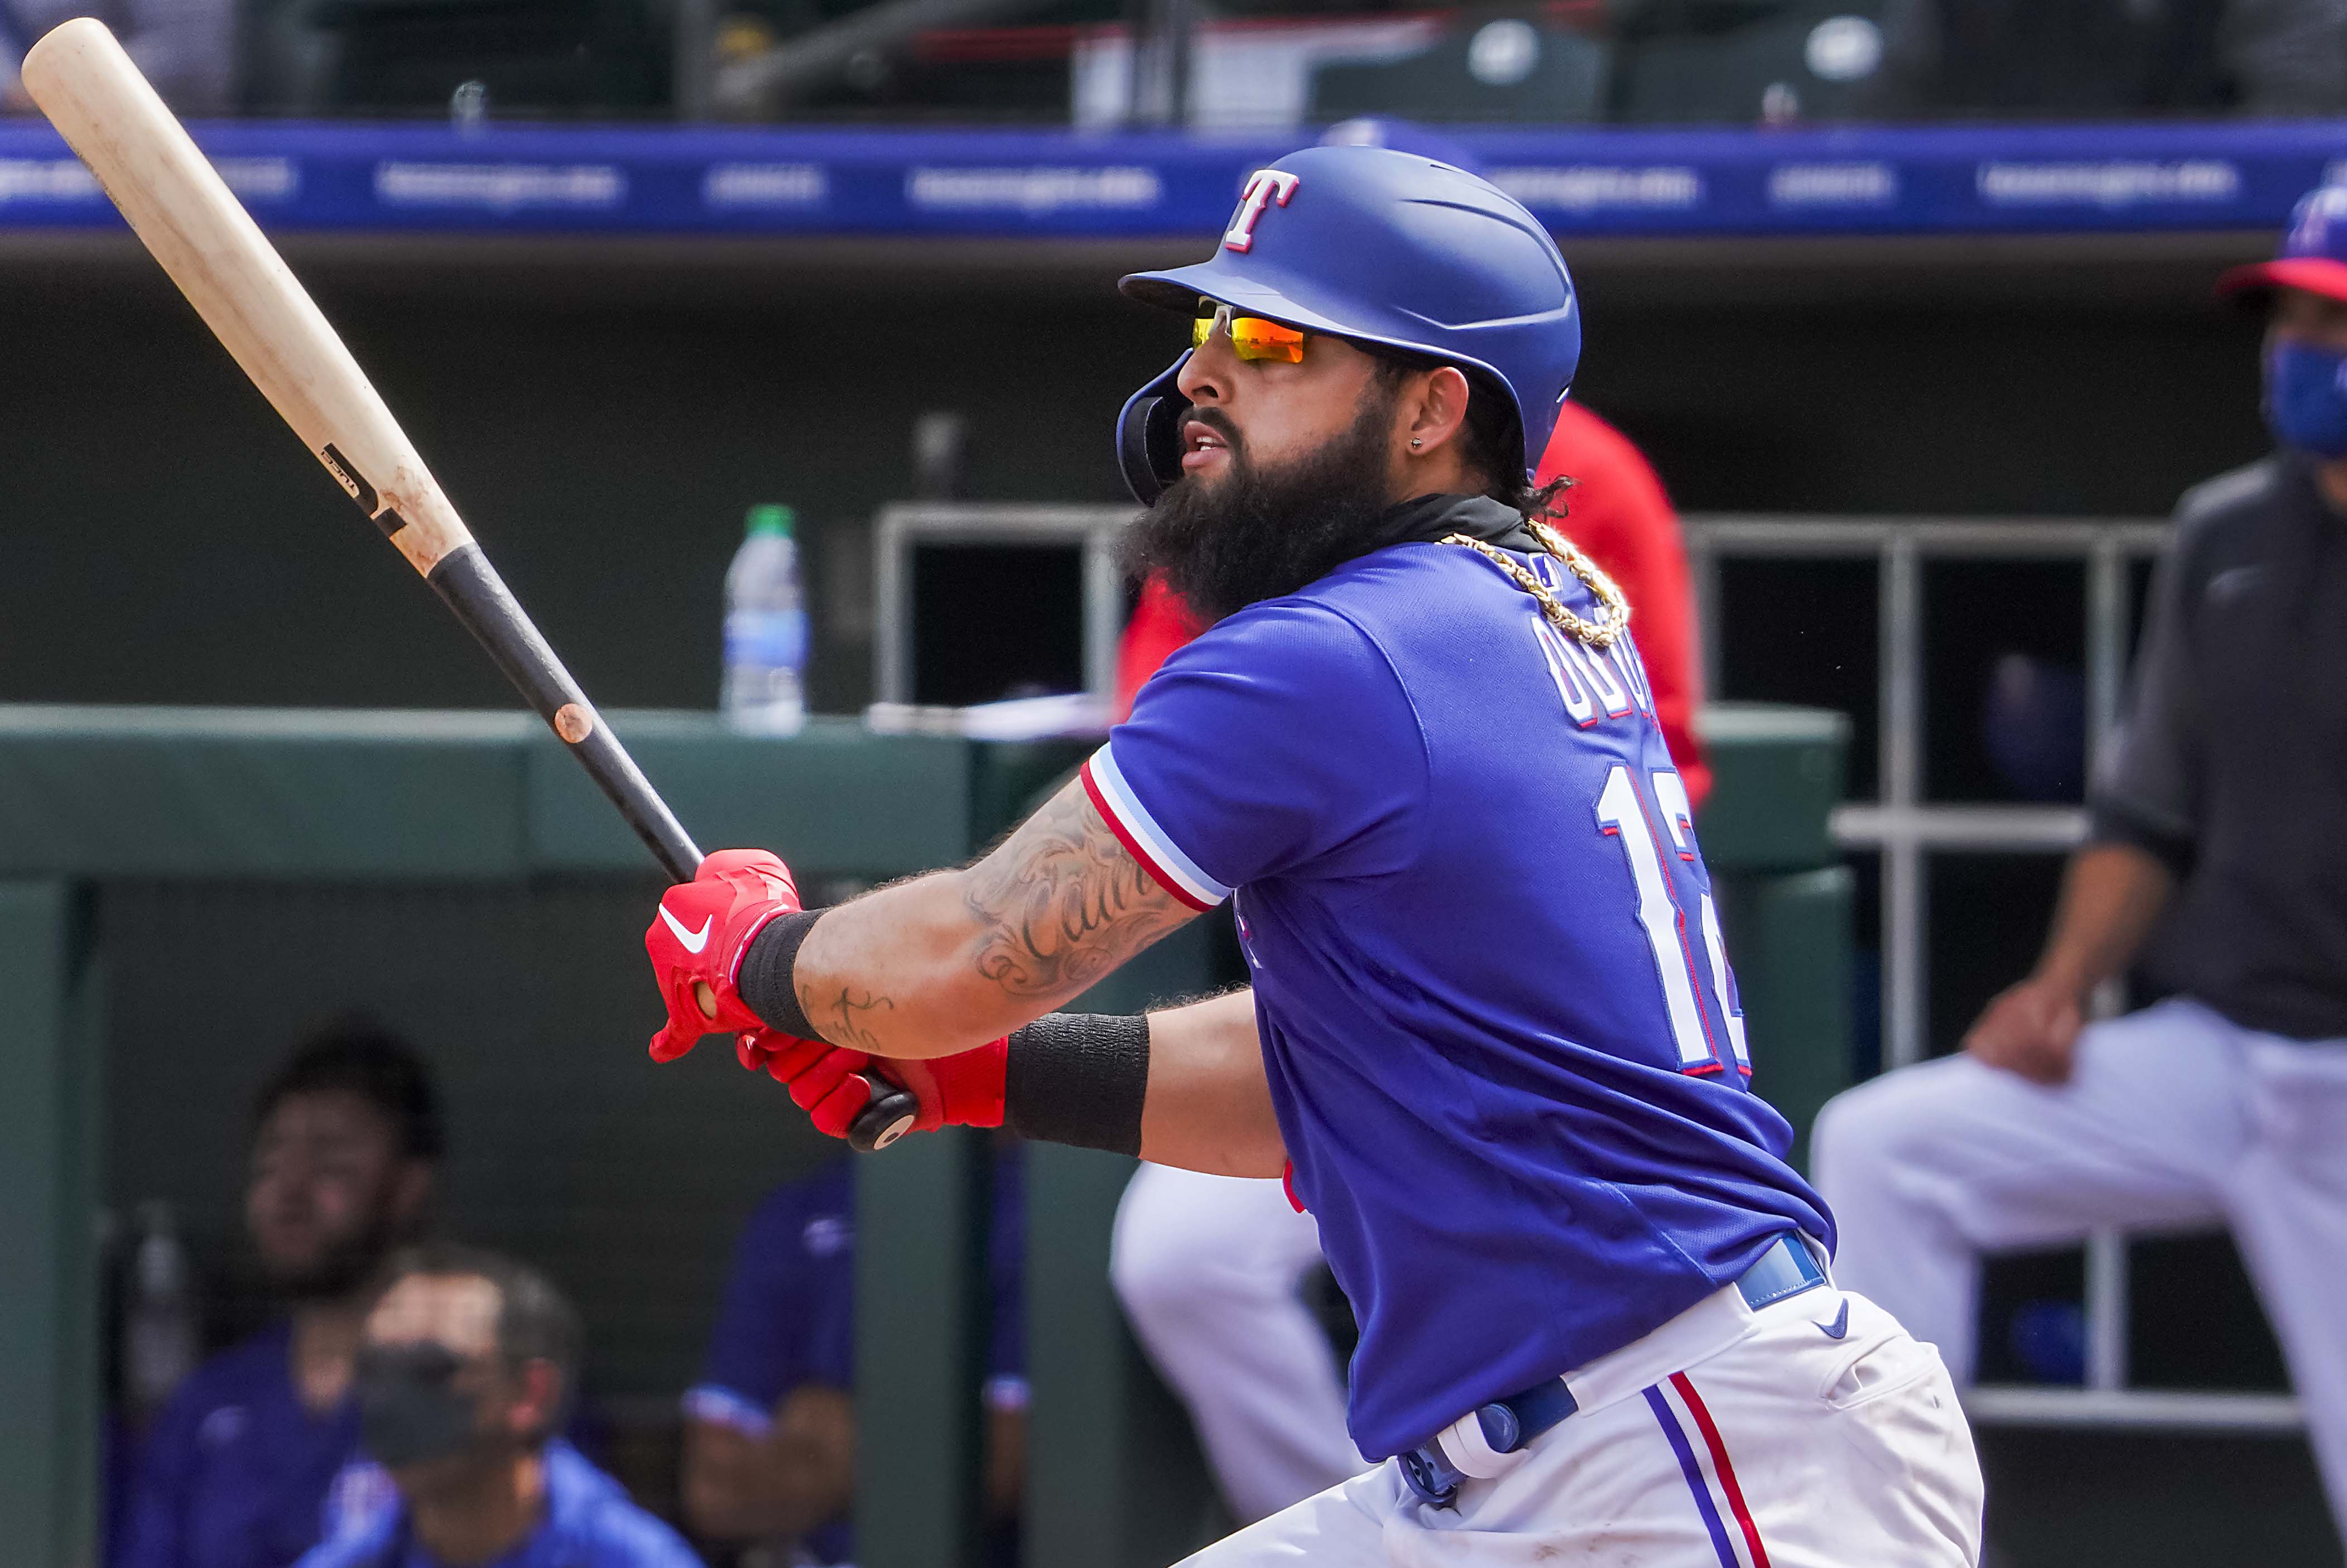 Rougned Odor won't make opening day roster, is no longer a Texas